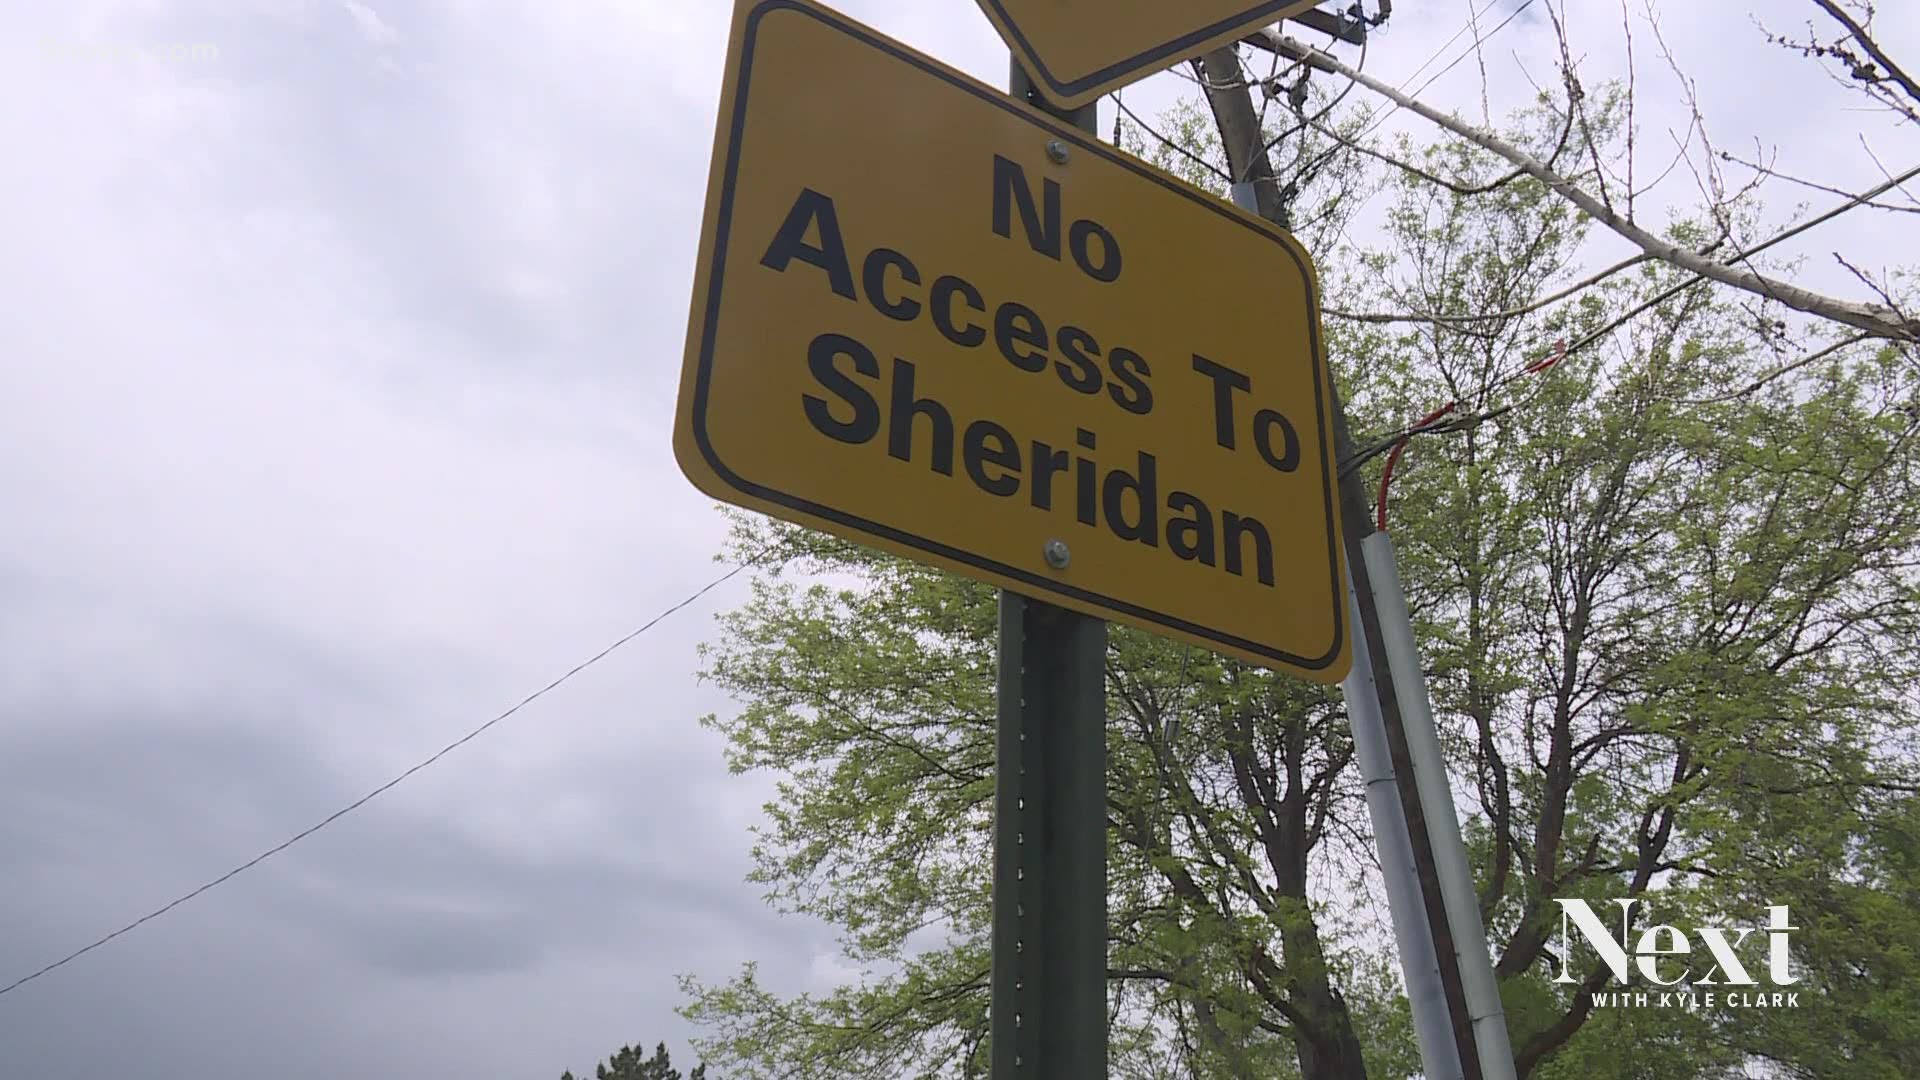 Someone in the town of Bow Mar has some explaining to do about this "no access to Sheridan" sign, because this road totally has access to Sheridan.